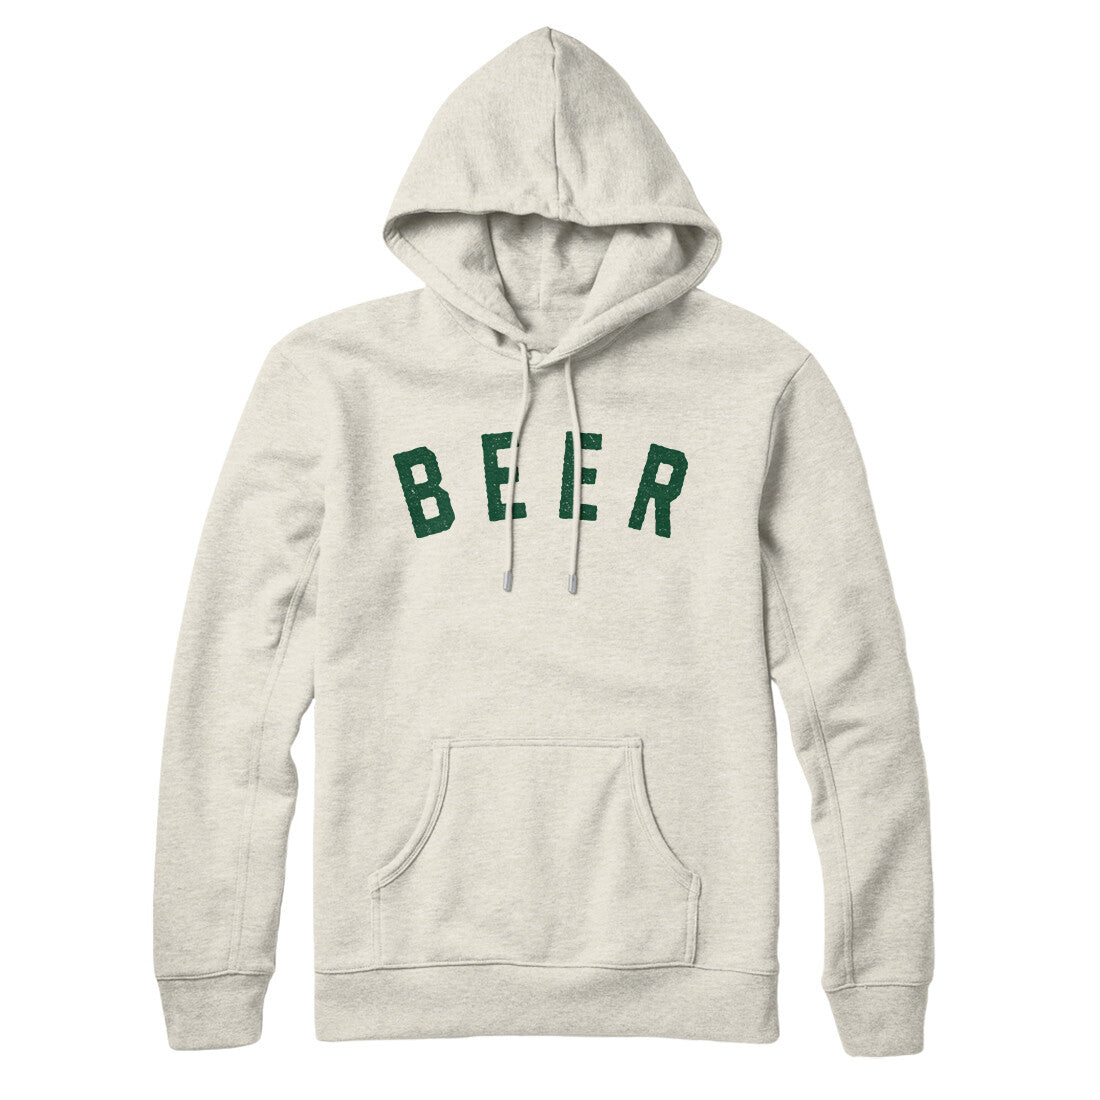 Beer in Heather Oatmeal Color